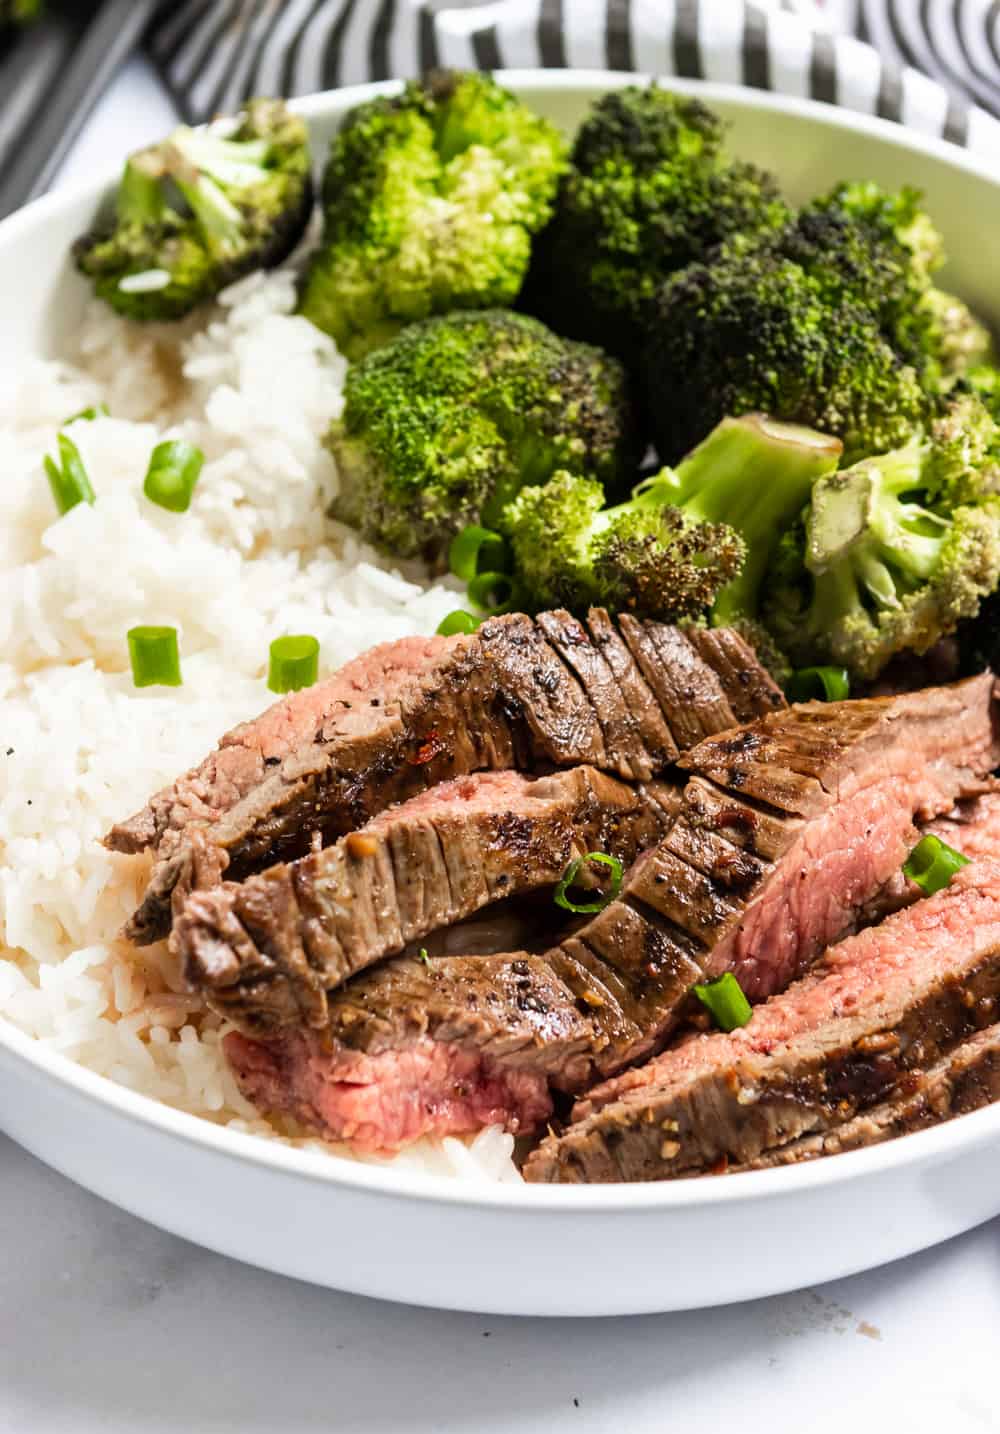 15 Minute Marinated Sheet Pan Steak and Broccoli Dinner